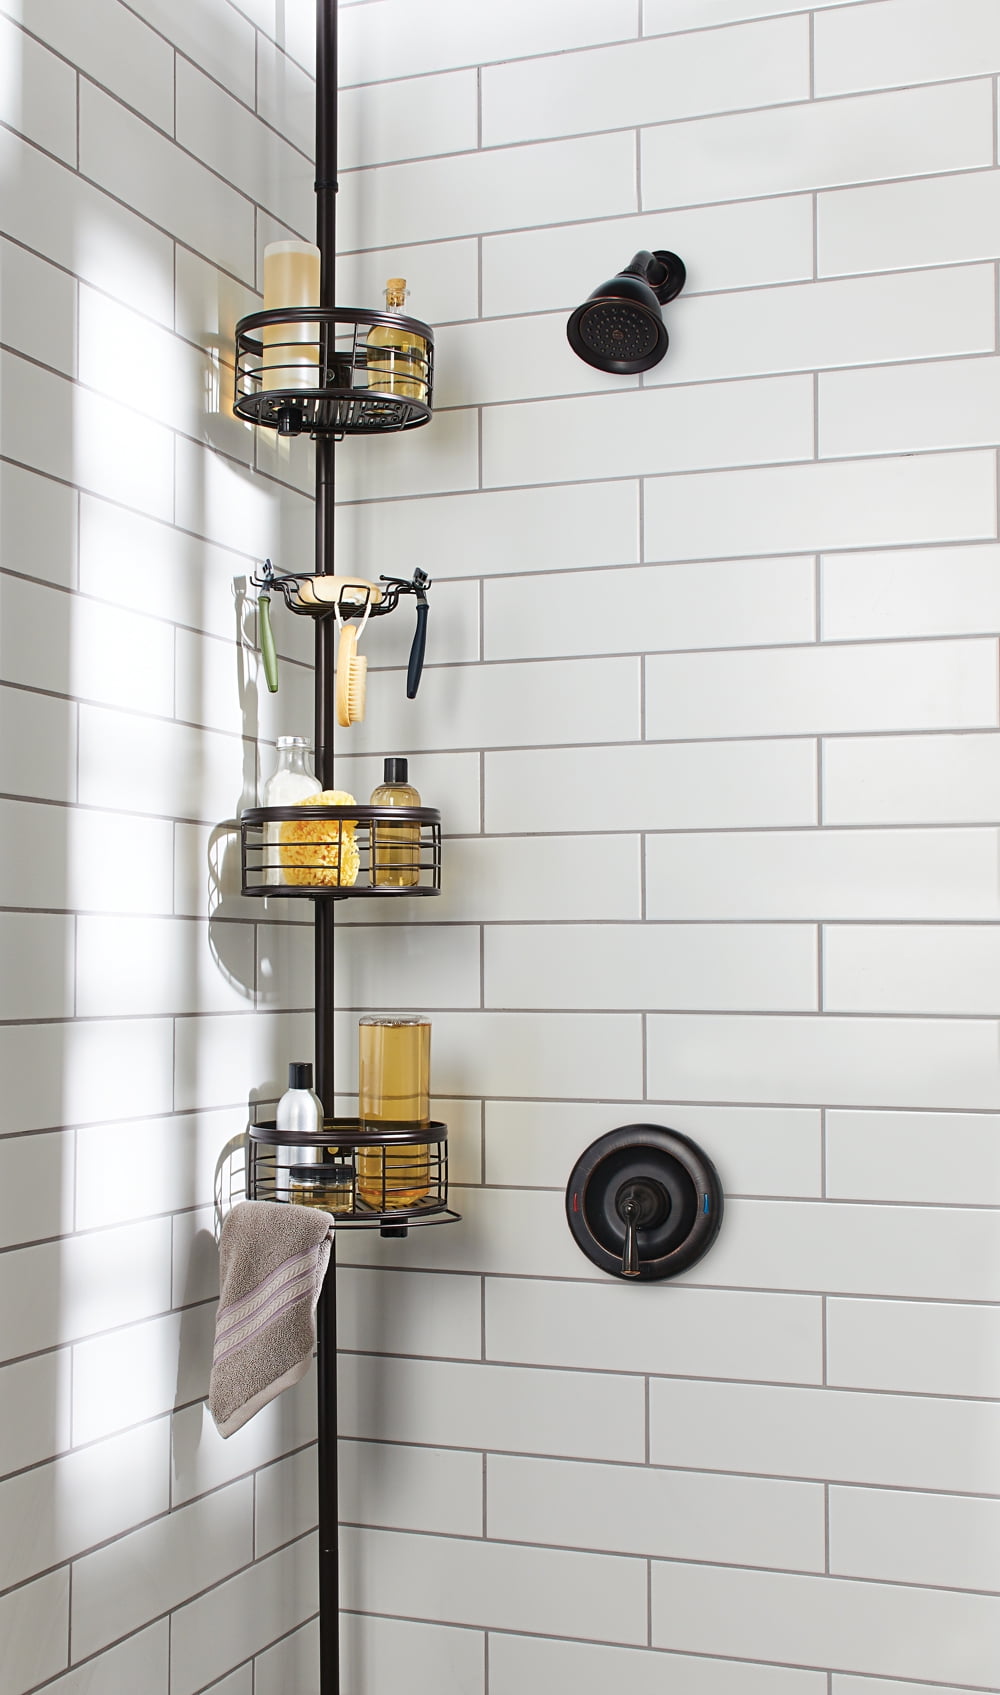 Rust-Resistant Tension Pole Shower Caddy, 3 Shelves, Oil Rubbed Bronze  Finish bathroom storage - AliExpress